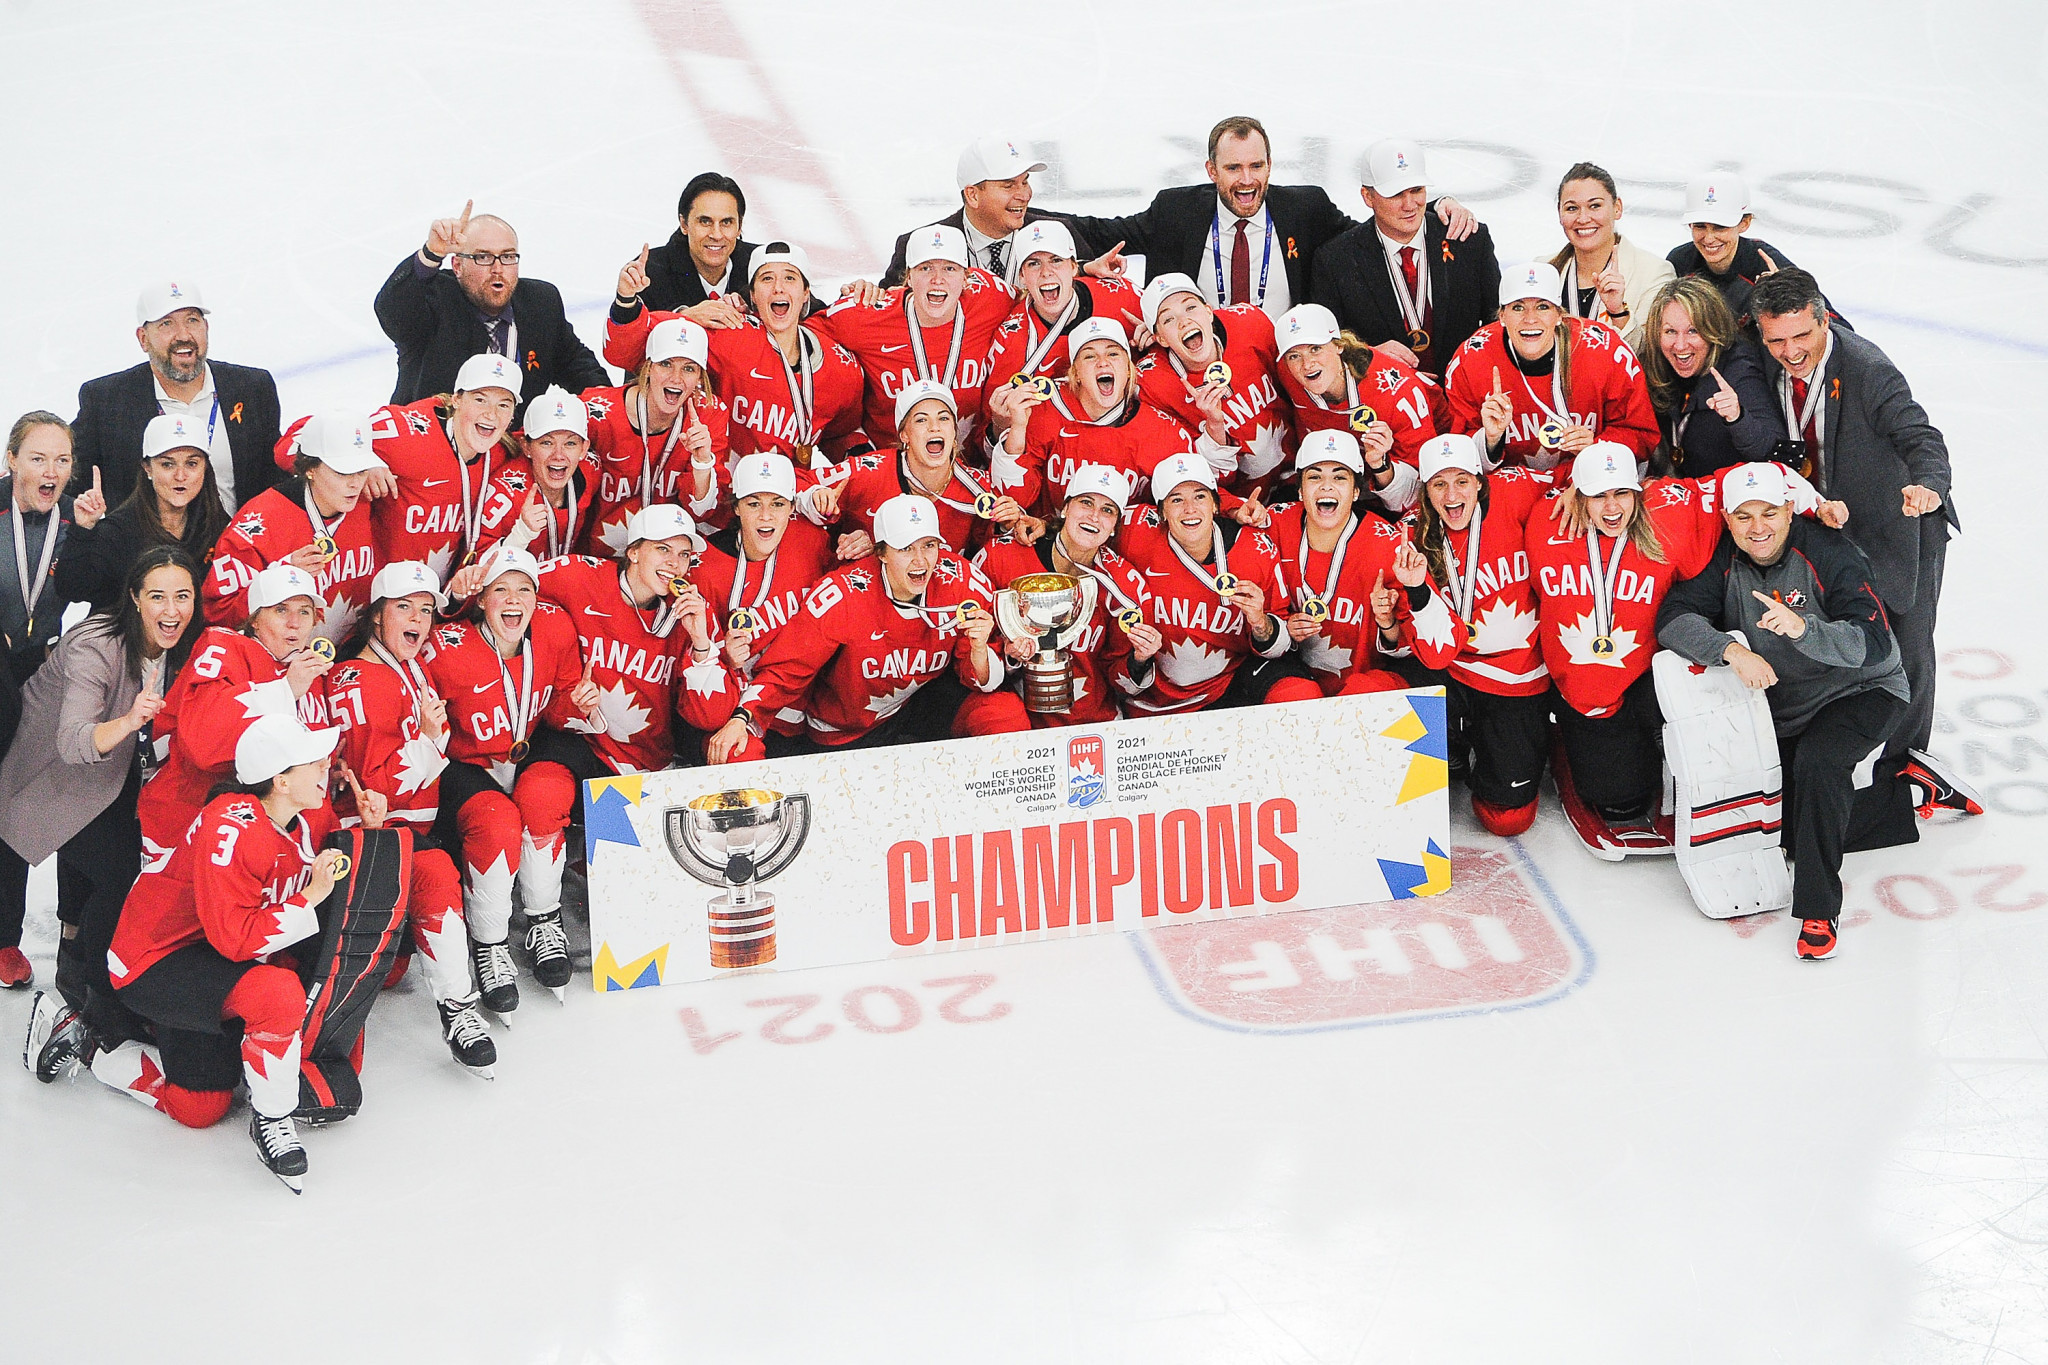 IIHF Women’s World Championship to be held in Winter Olympic years after rule change